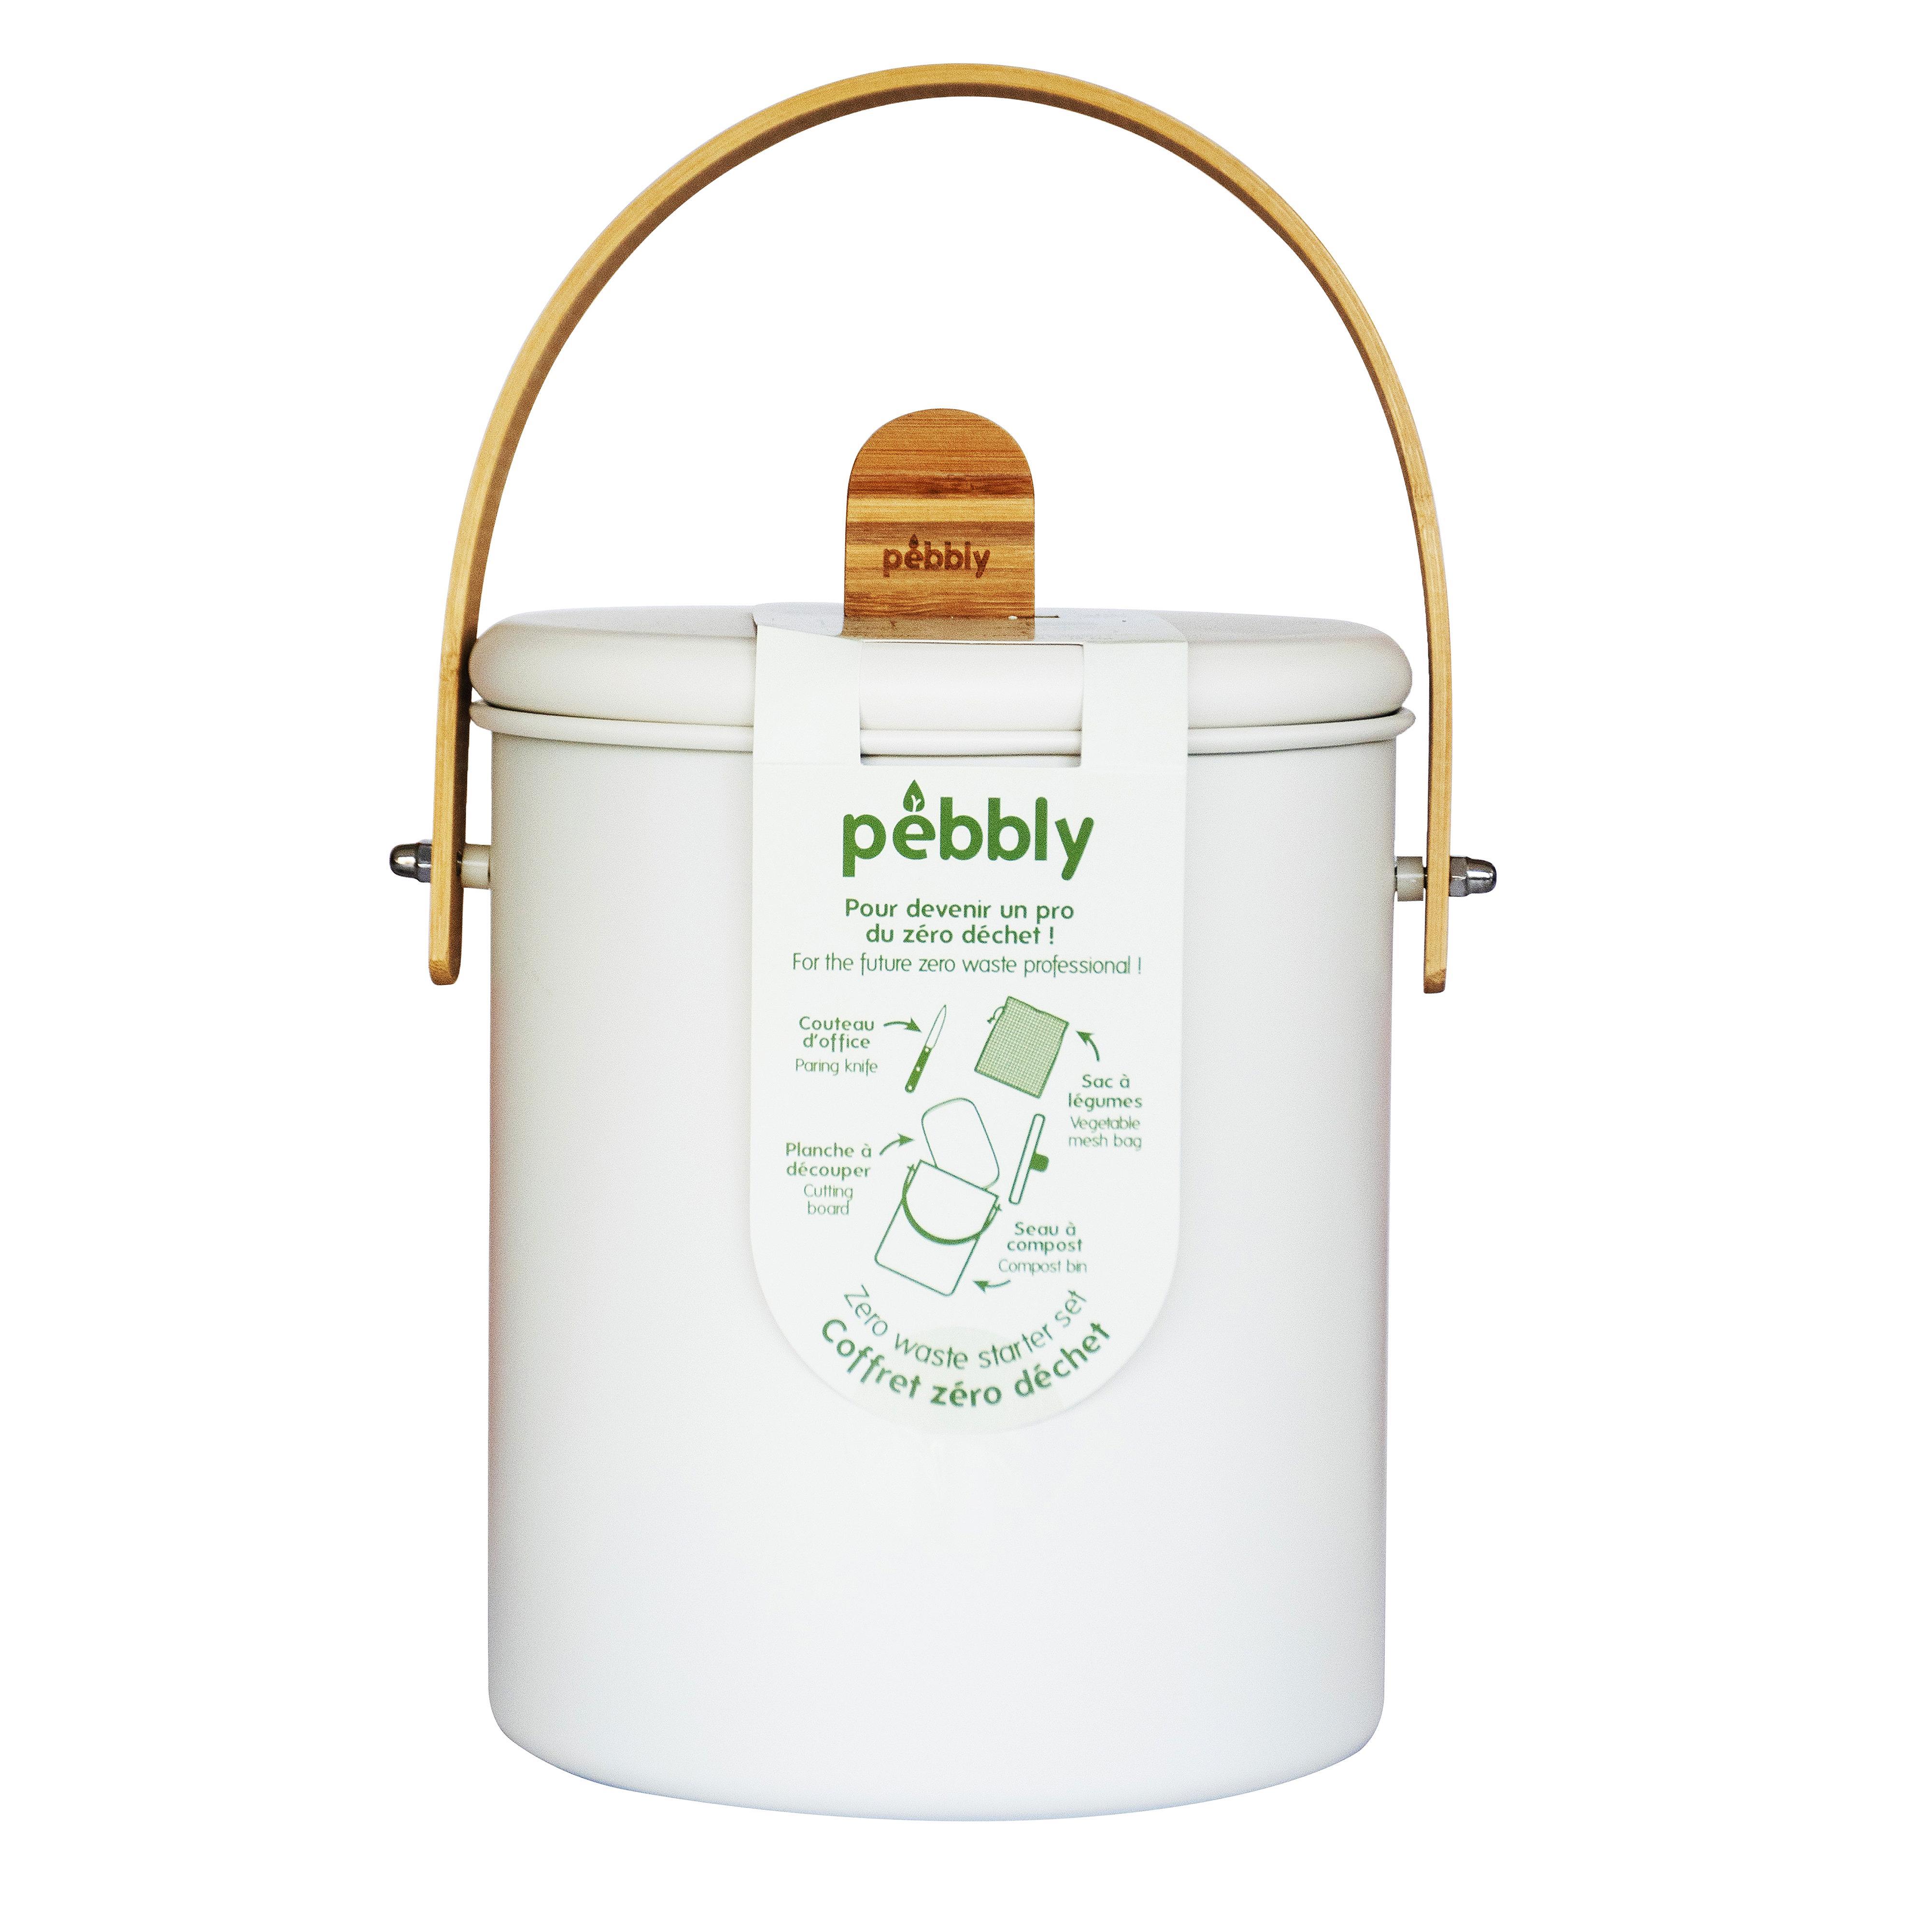 Pebbly Zero Waste Set Kitchen Items Reduce Waste With Cutting Board Pairing Knife Compost Bin Cream/Natural